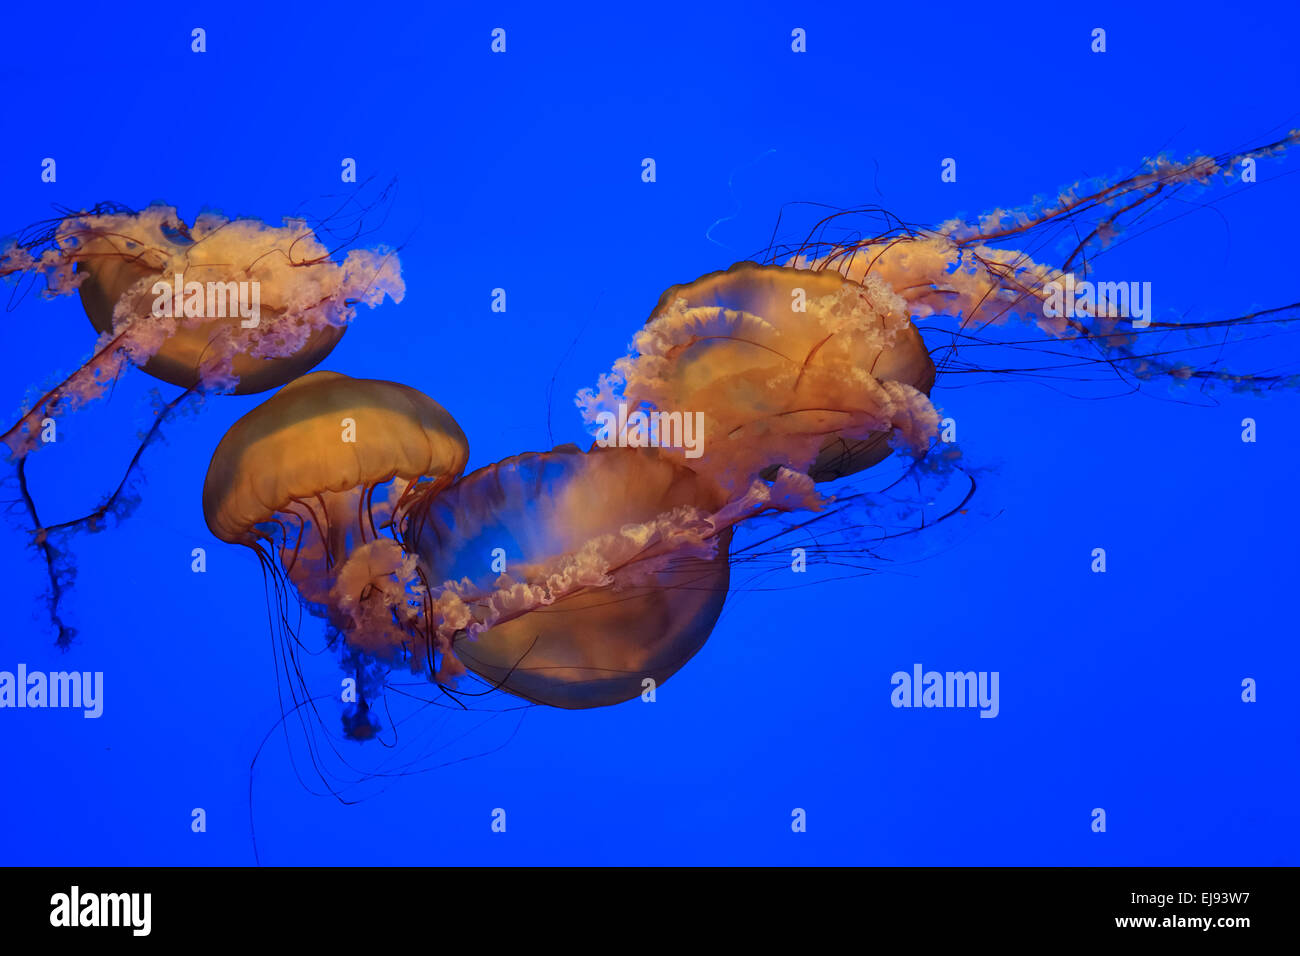 jellyfish with blue background Stock Photo